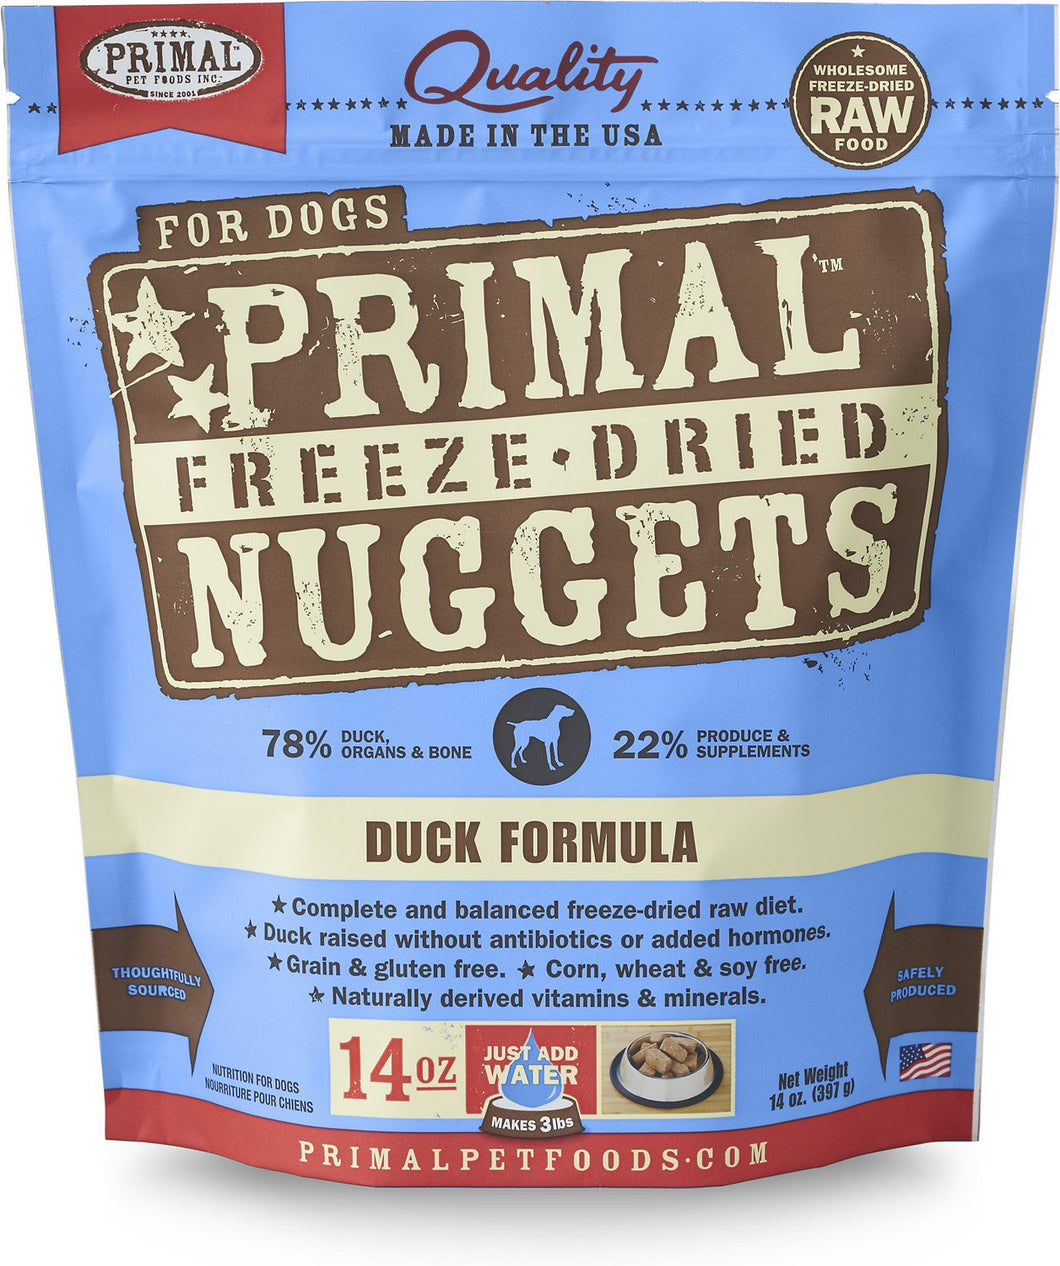 Primal Freeze Dried Nuggets for Dog